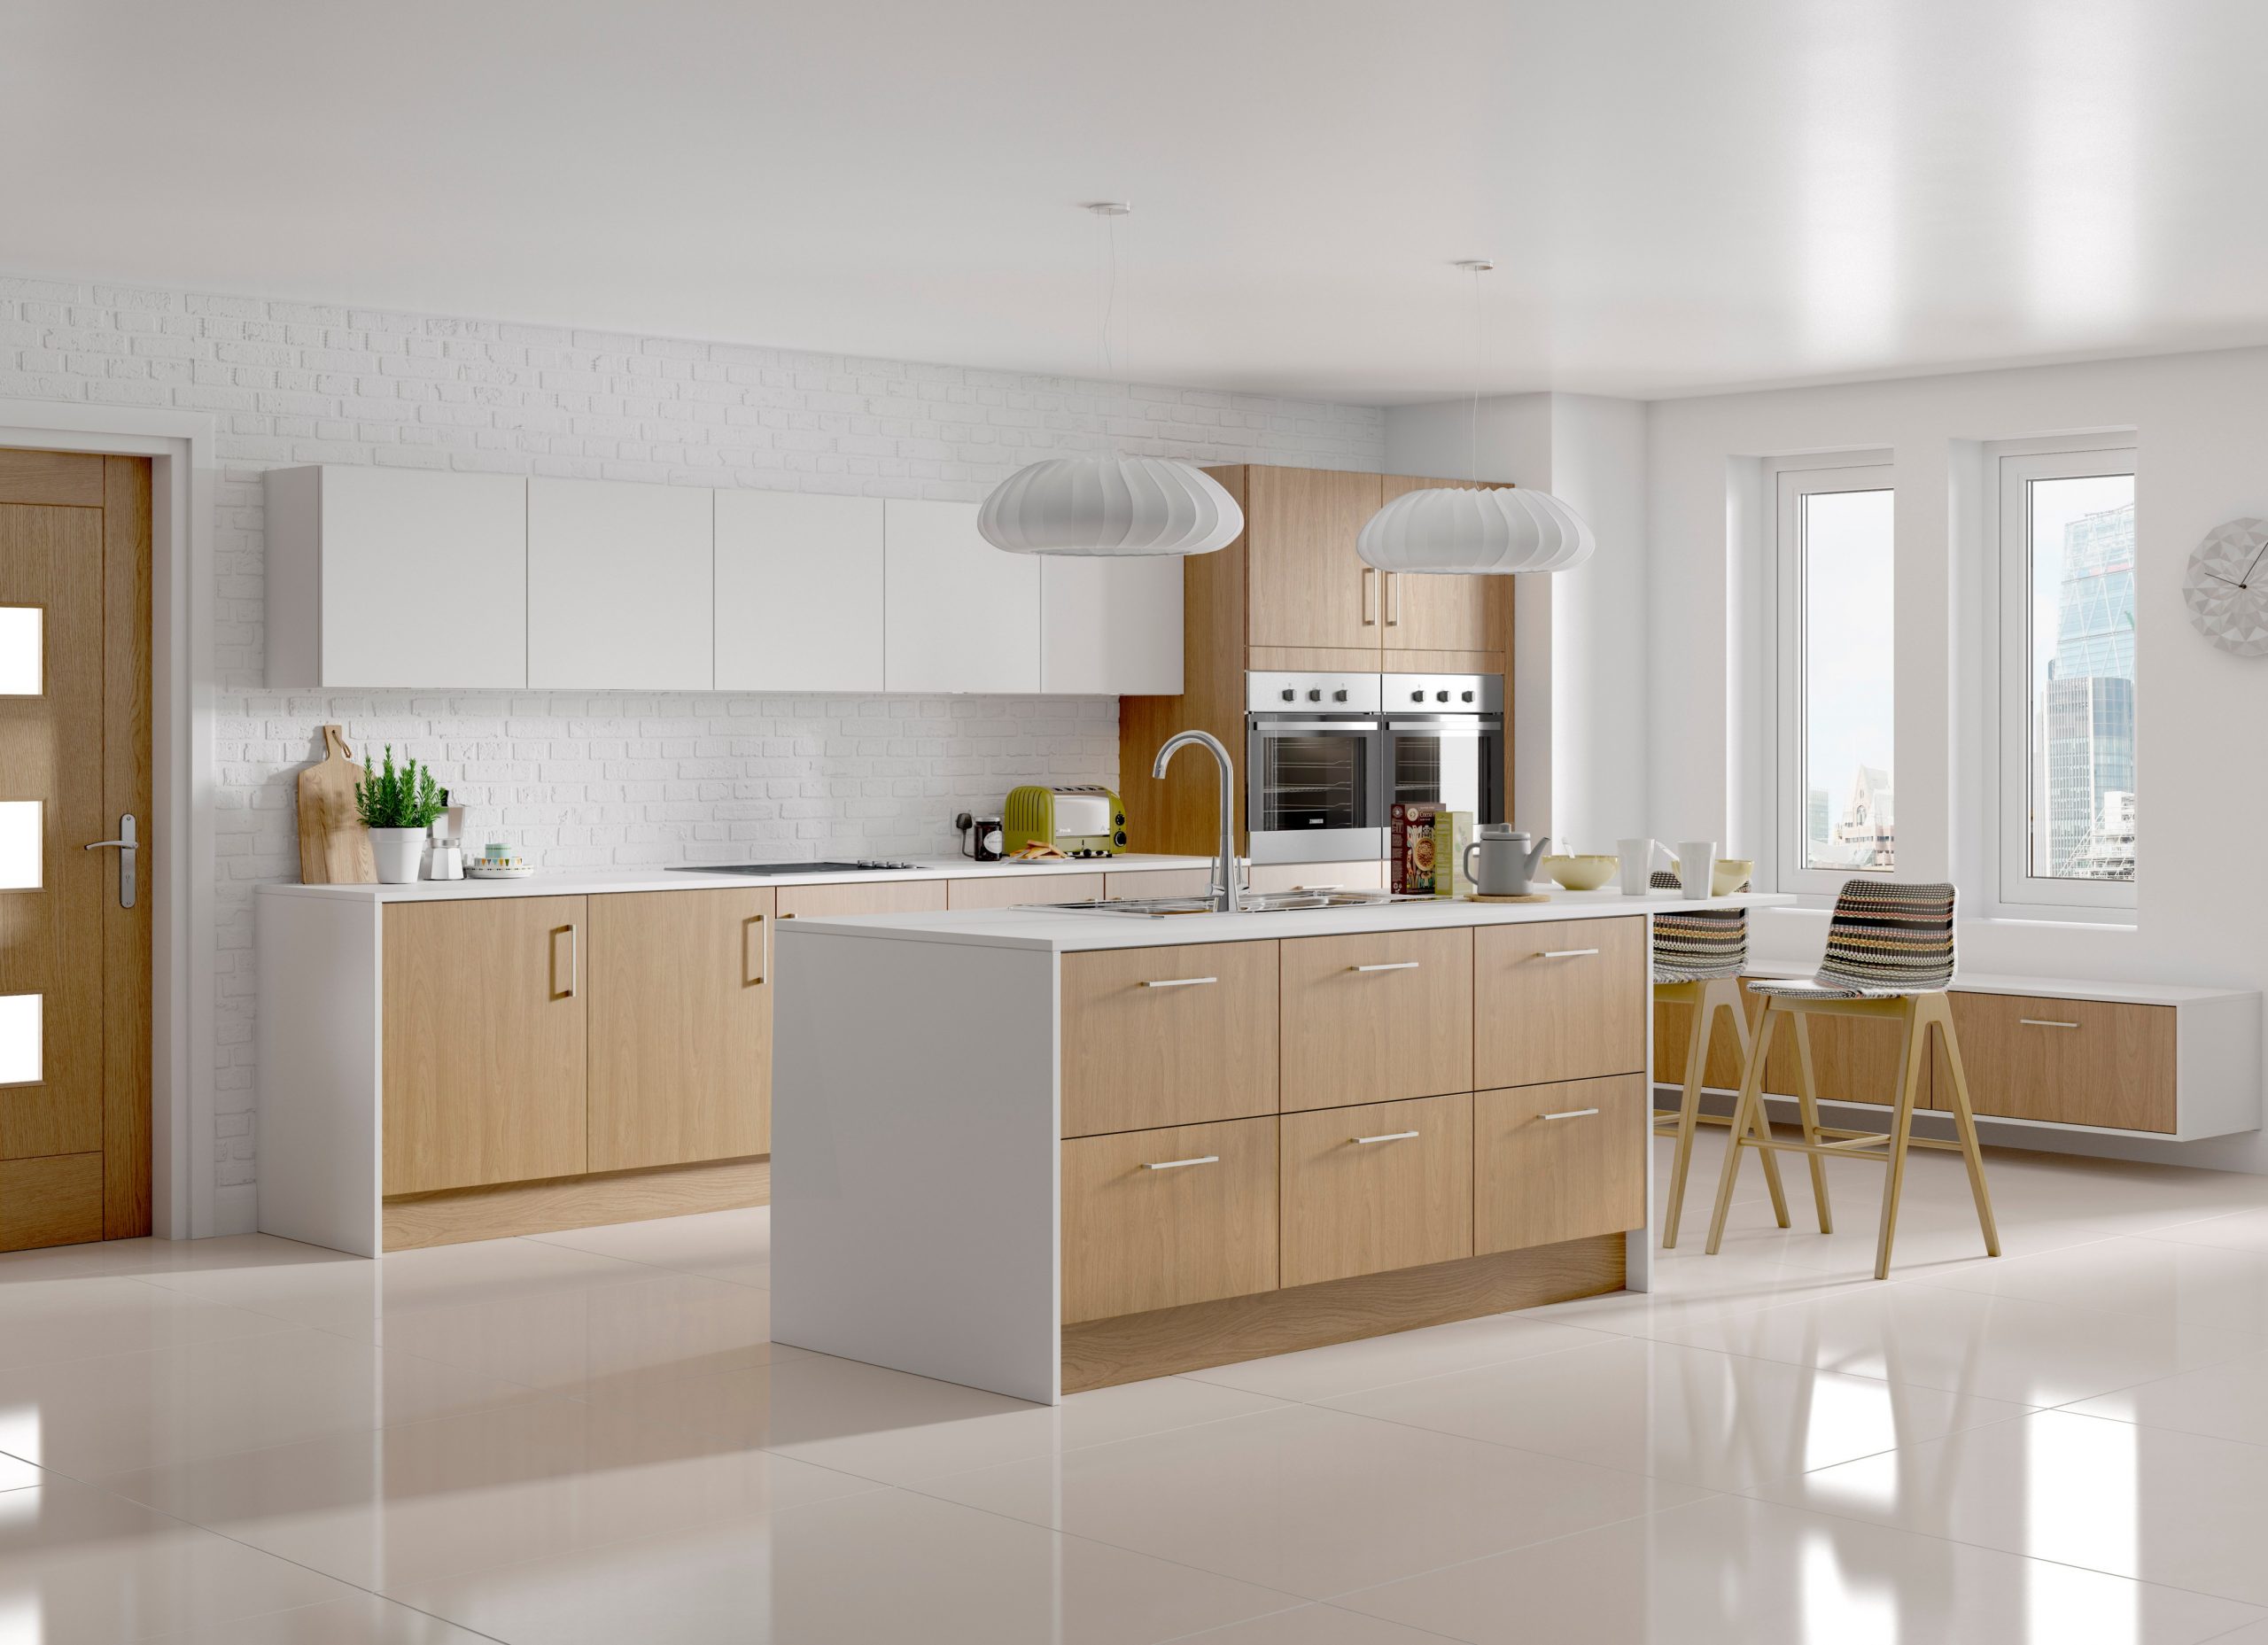 Modern white kitchen area with island bay and modern oak cabinetry